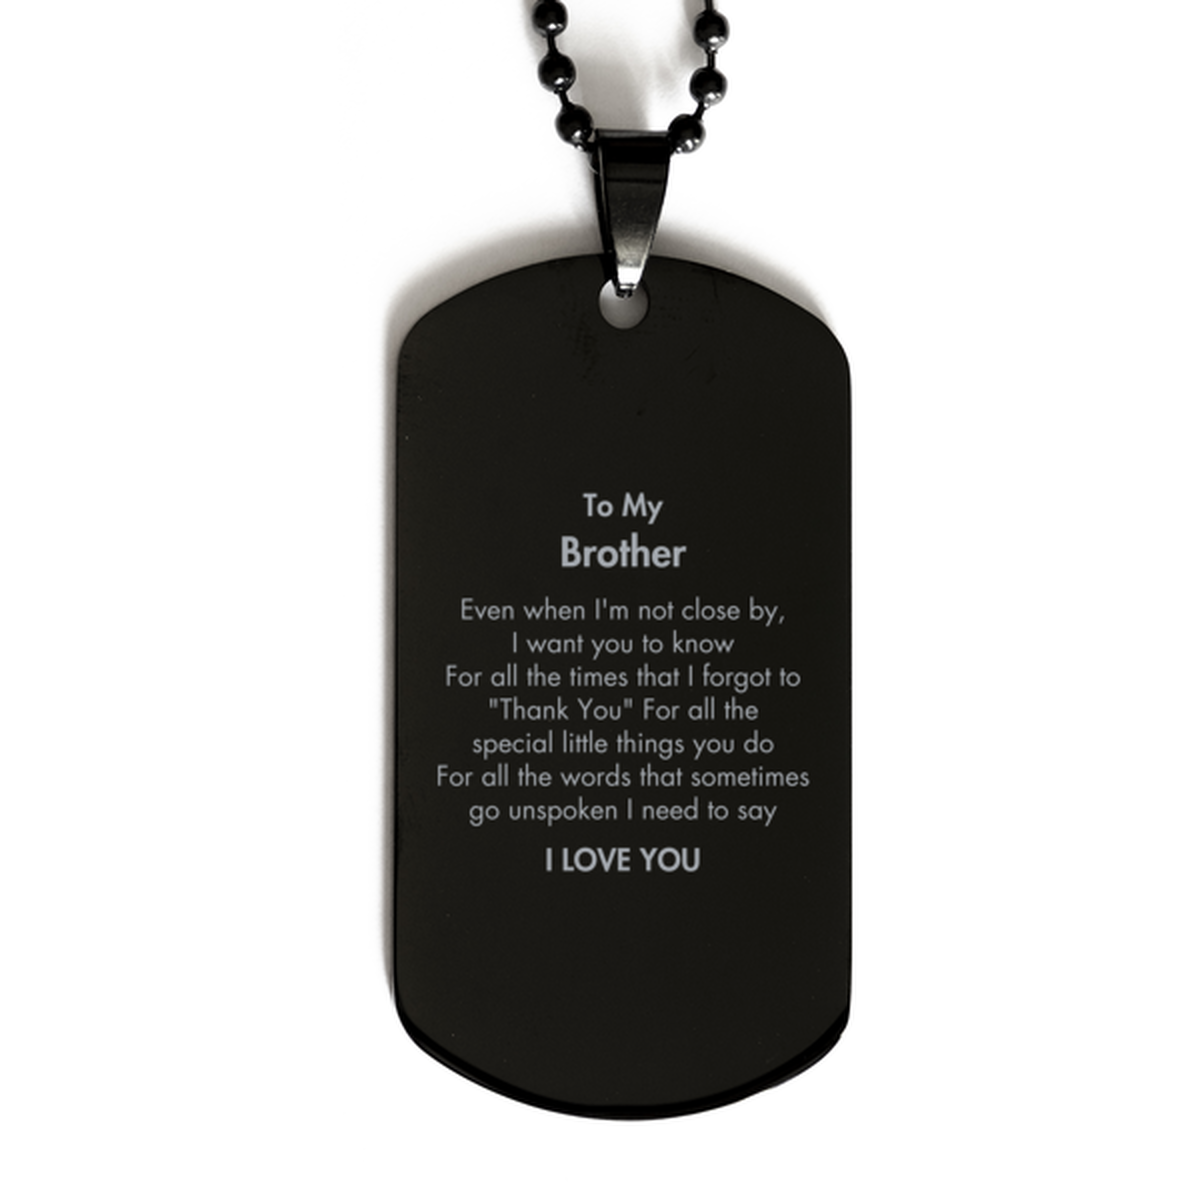 Thank You Gifts for Brother, Keepsake Black Dog Tag Gifts for Brother Birthday Mother's day Father's Day Brother For all the words That sometimes go unspoken I need to say I LOVE YOU